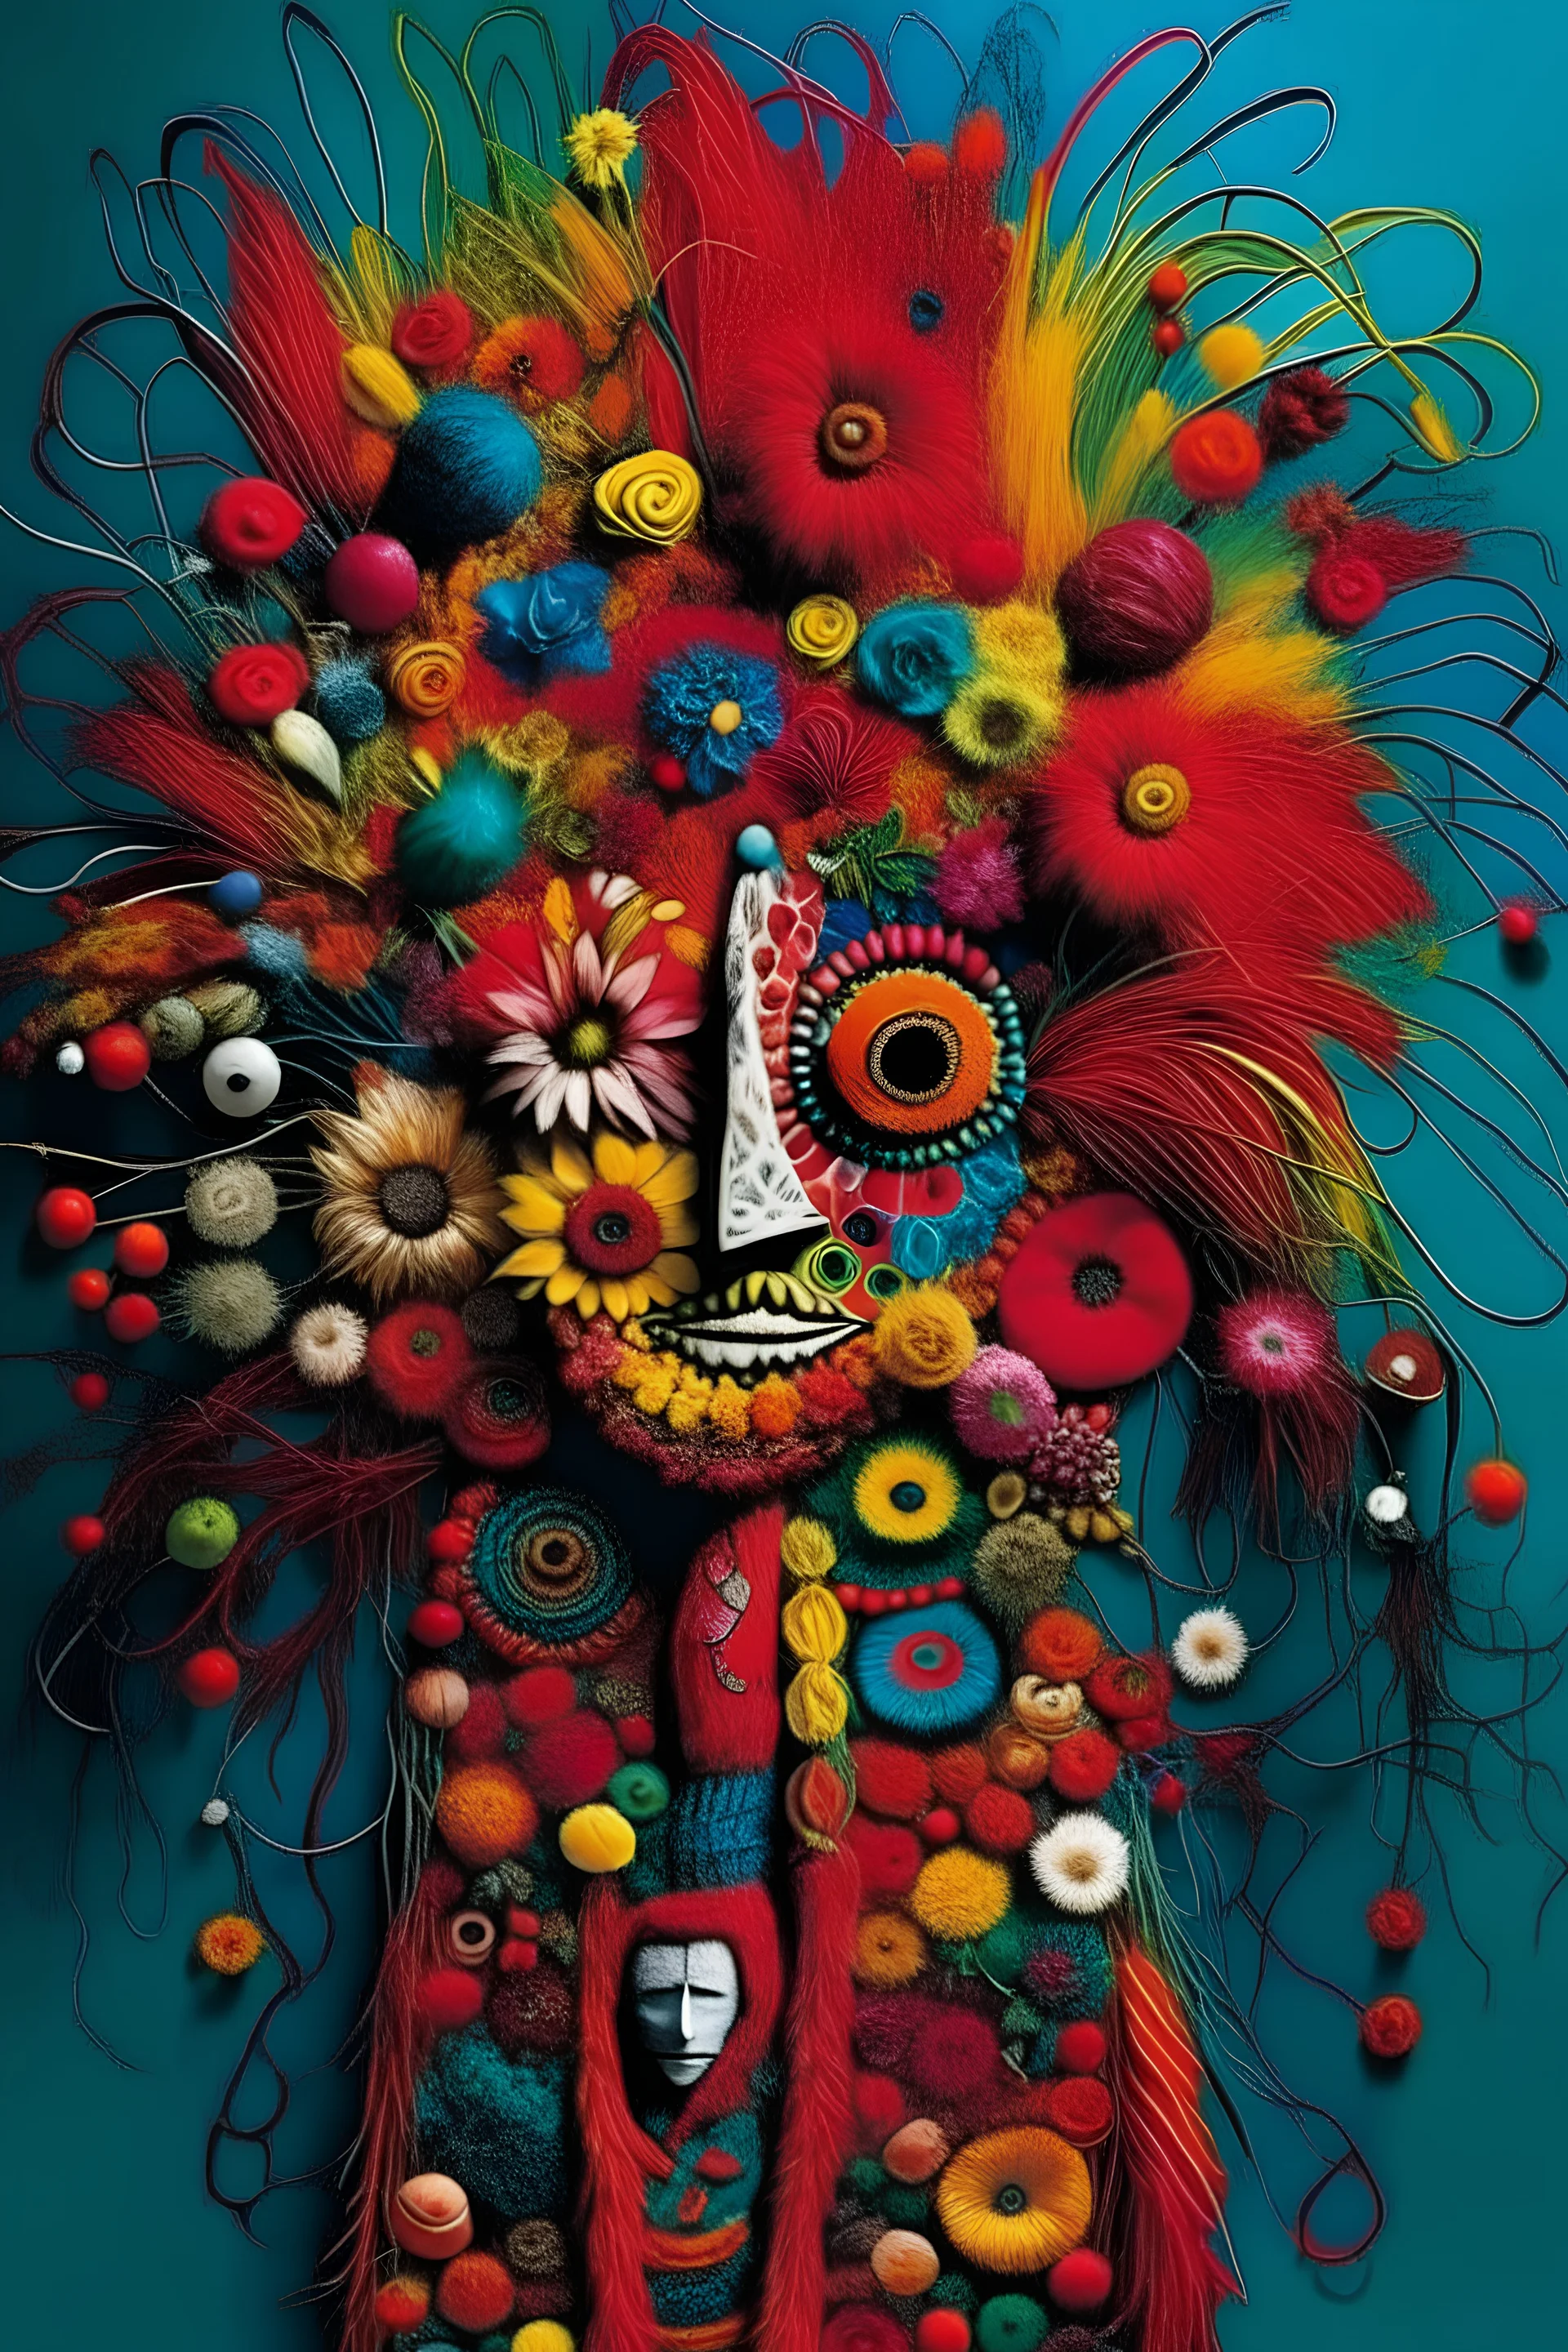 create simple art work inspired by Nick Cave visual artist incorporating textiles, found objects, and vibrant colors to explore themes of identity and self-expression